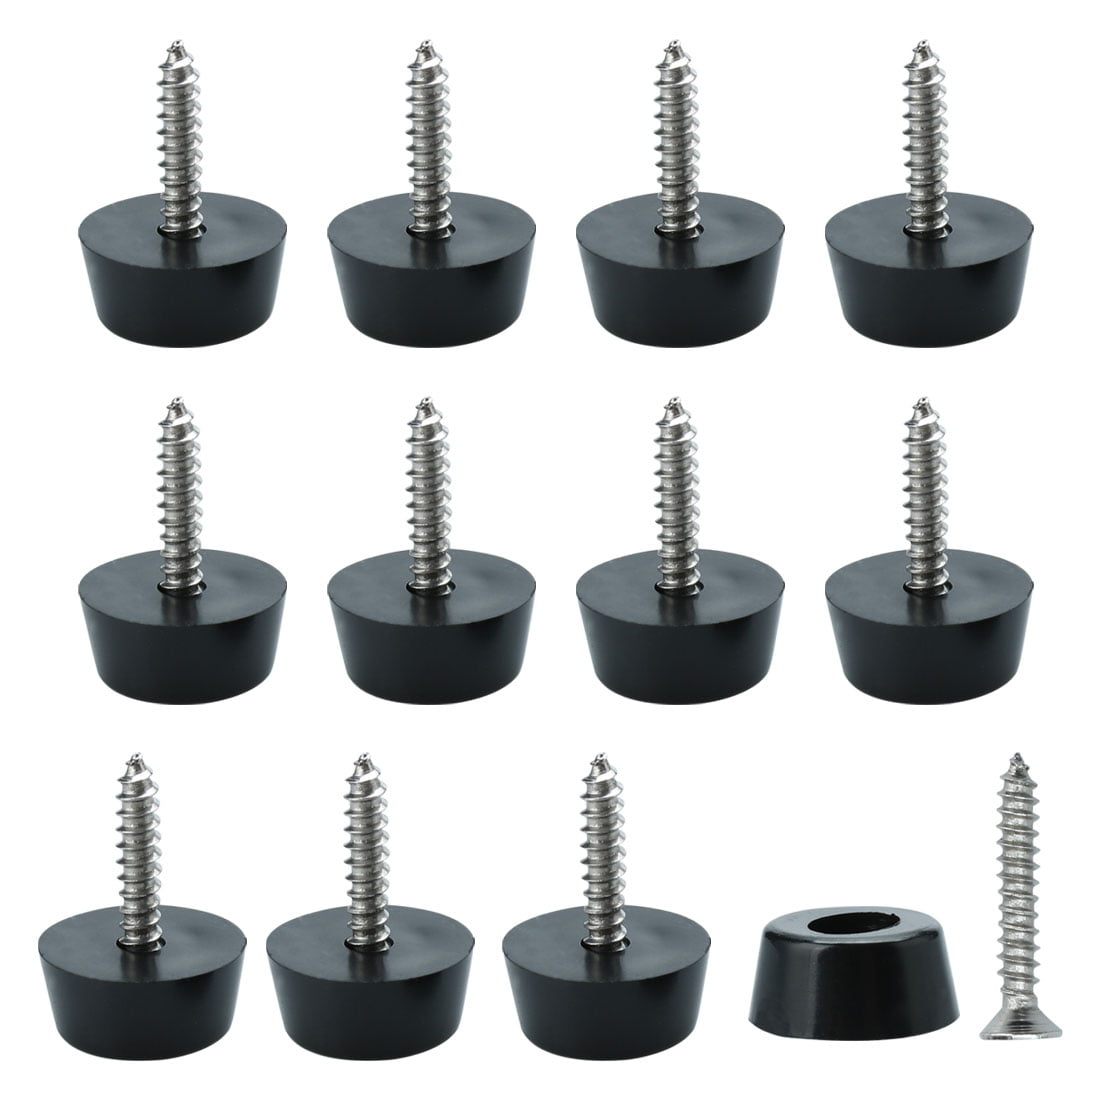 Details about   200 Pieces Soft Board Screw on Rubber Feet for Furniture Electronics and Appl... 